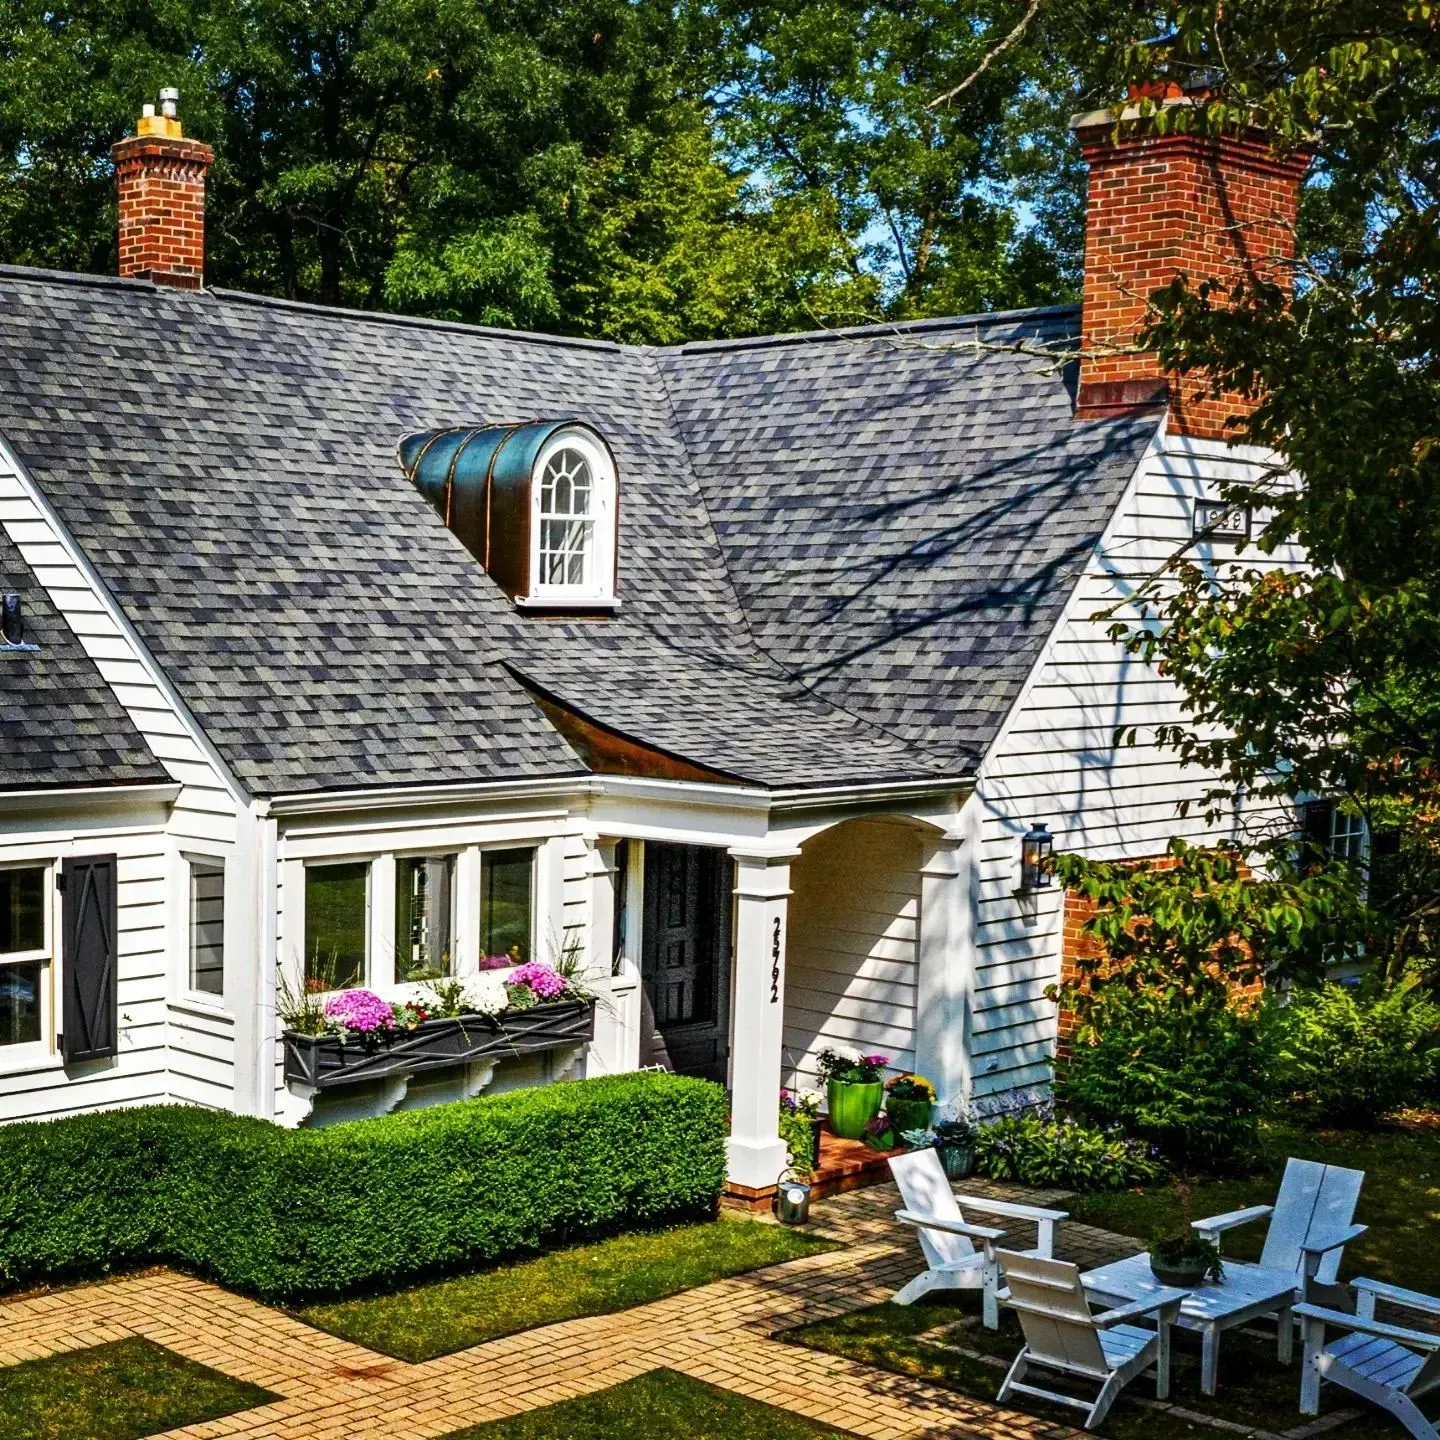 Benjamin Moore Harwood Putty house exterior paint